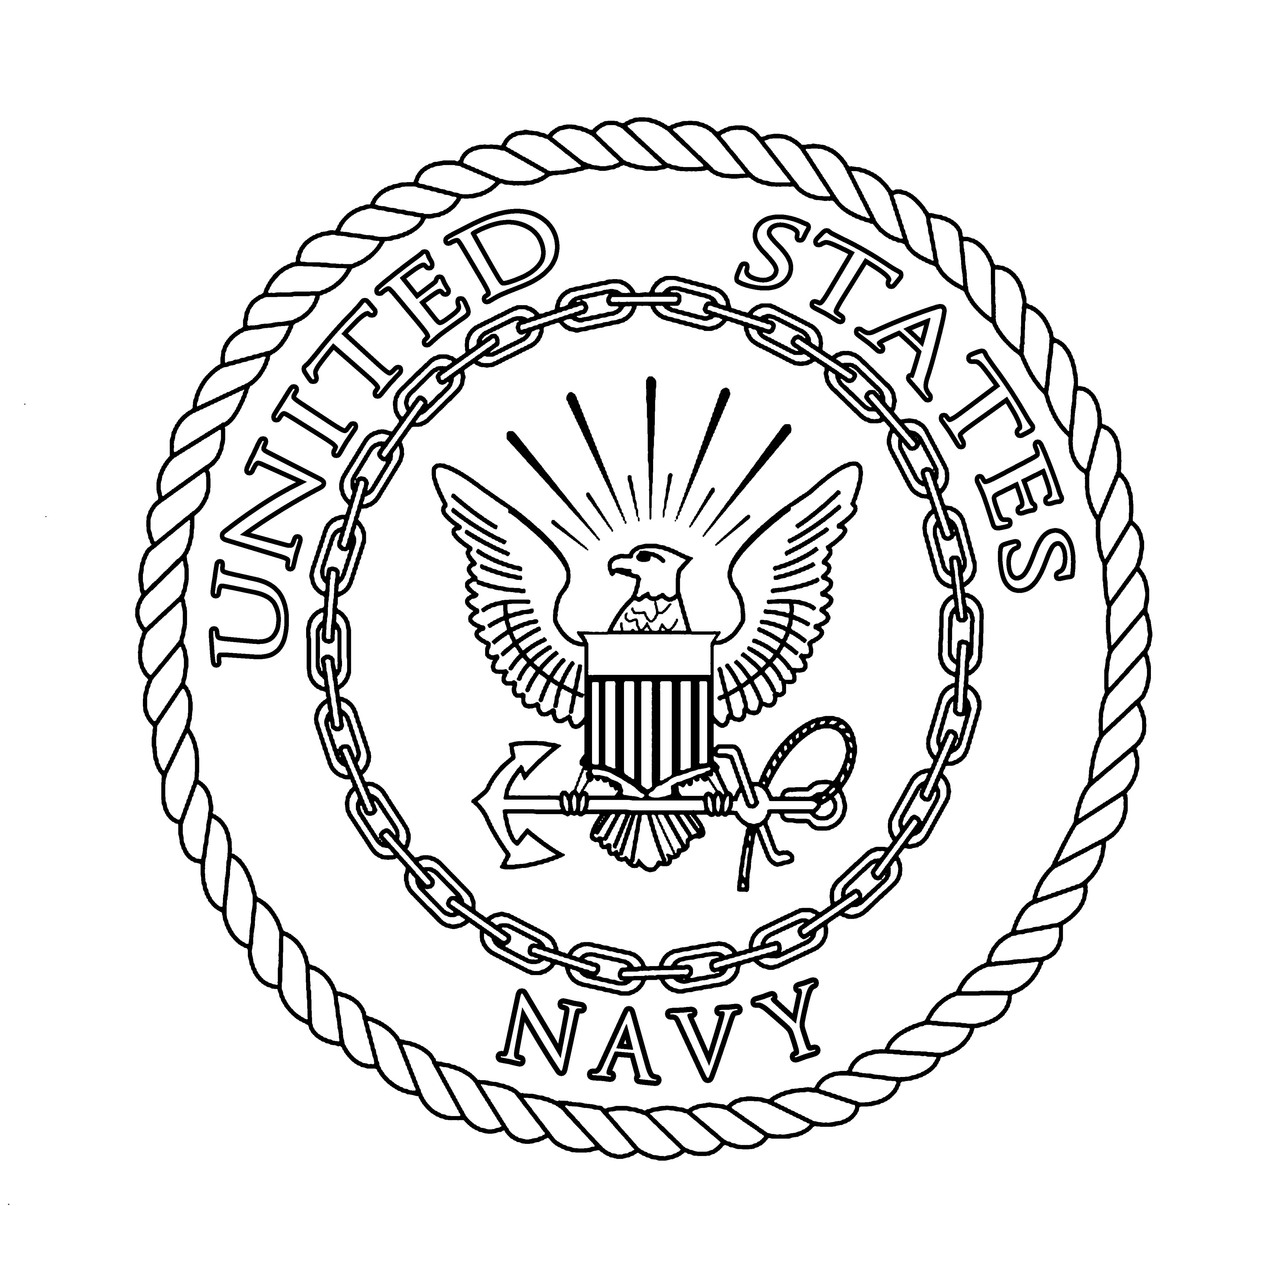 Navy Senior Chief Anchor Clip Art Sketch Coloring Page 6372 | The Best ...